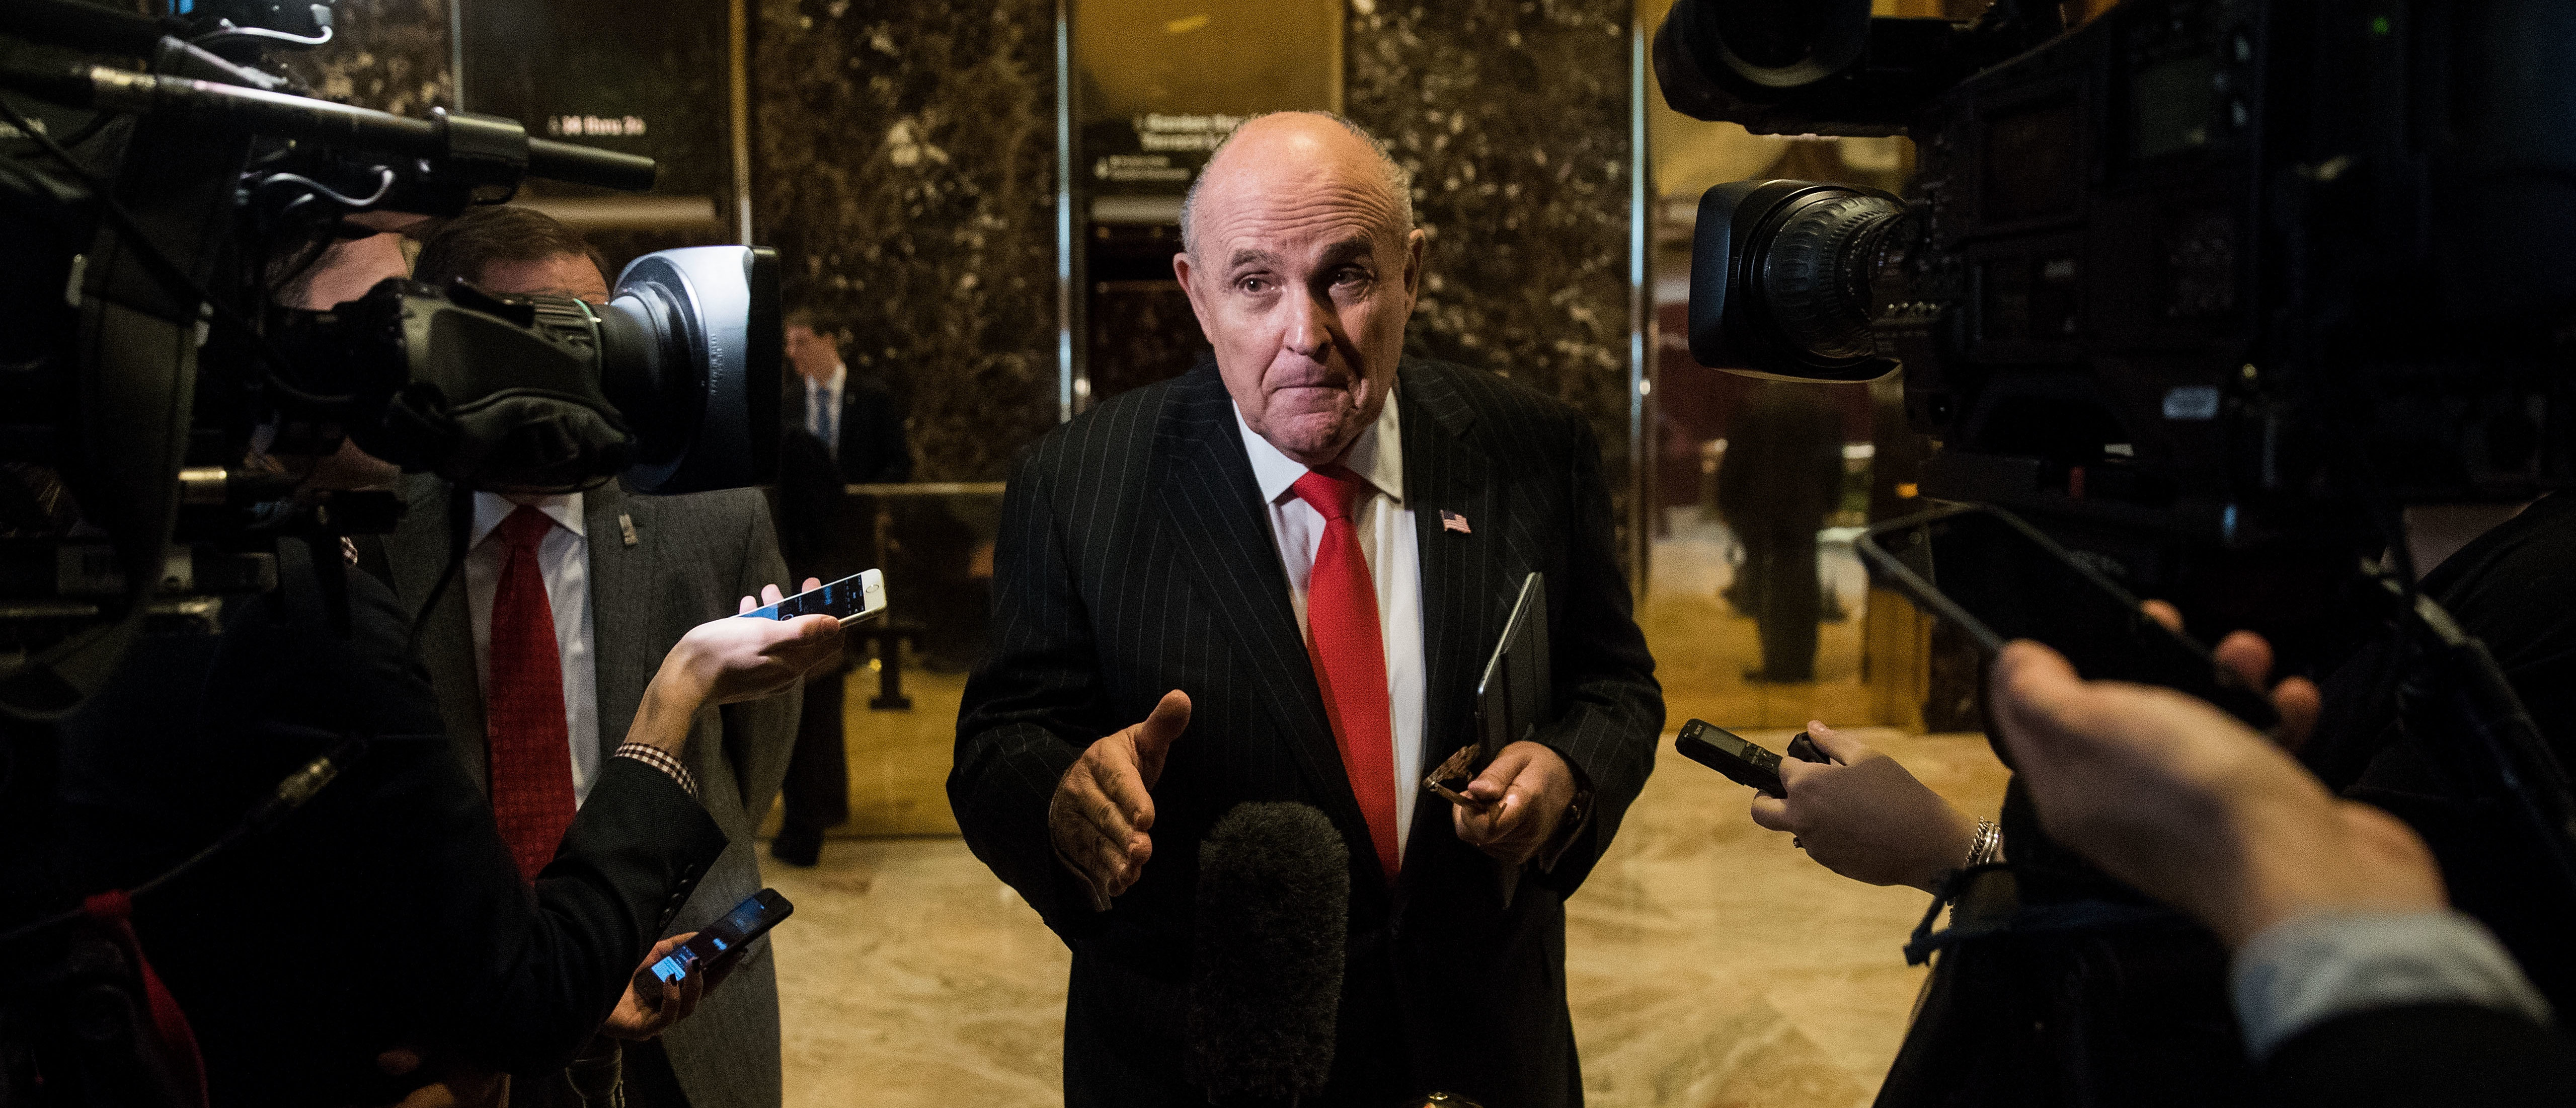 NEW YORK, NY - JANUARY 12: Former New York City Mayor Rudy Giuliani speaks to reporters at Trump Tower, January 12, 2017 in New York City. President-elect Trump continues to hold meetings Trump Tower. (Photo by Drew Angerer/Getty Images)